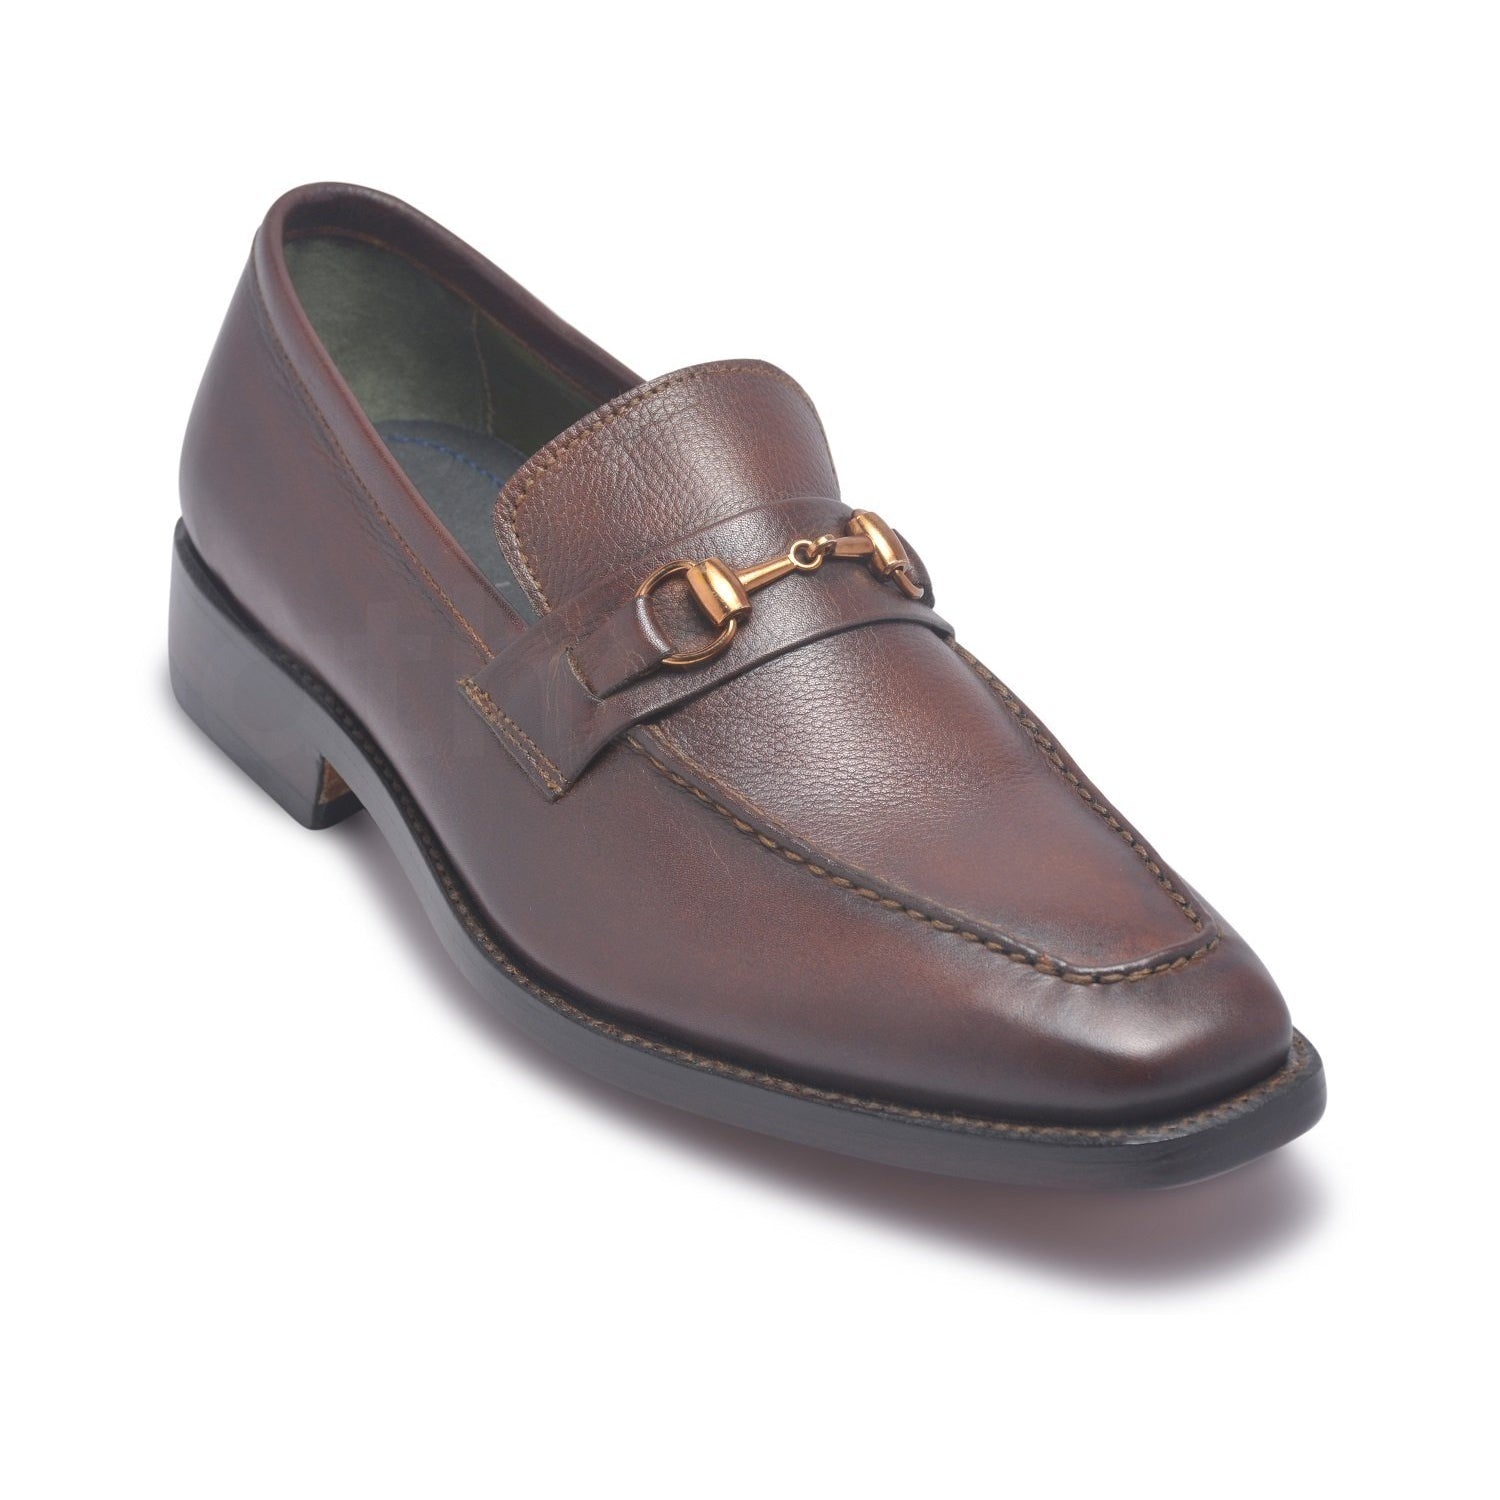 mens Bit Loafer leather shoes brown